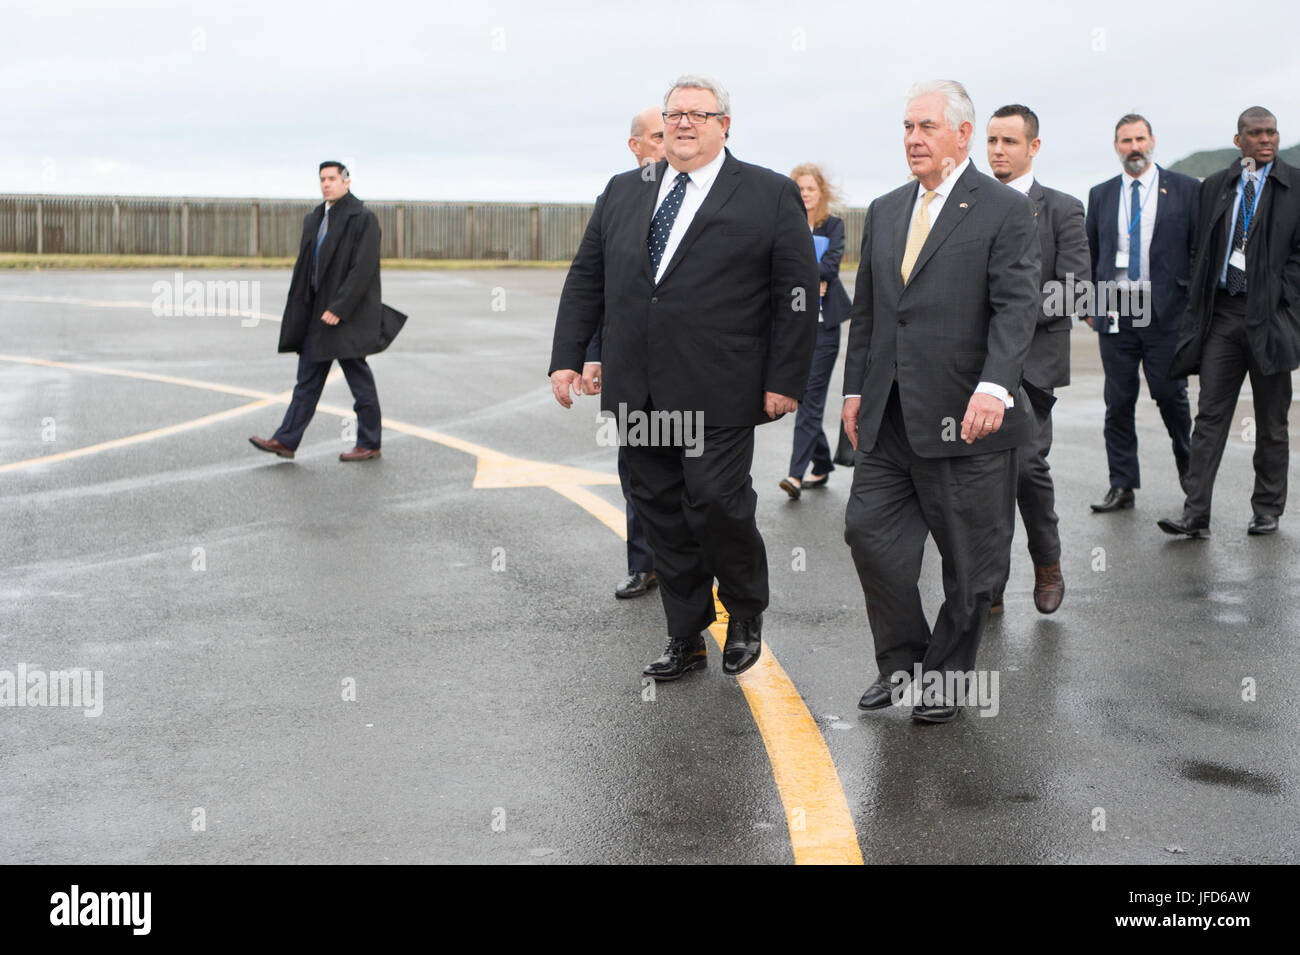 U.S. Secretary of State Rex Tillerson is escorted to his plane by New Zealander Foreign Minister Gerry Brownlee in Wellington, New Zealand, on June 6, 2017. Stock Photo